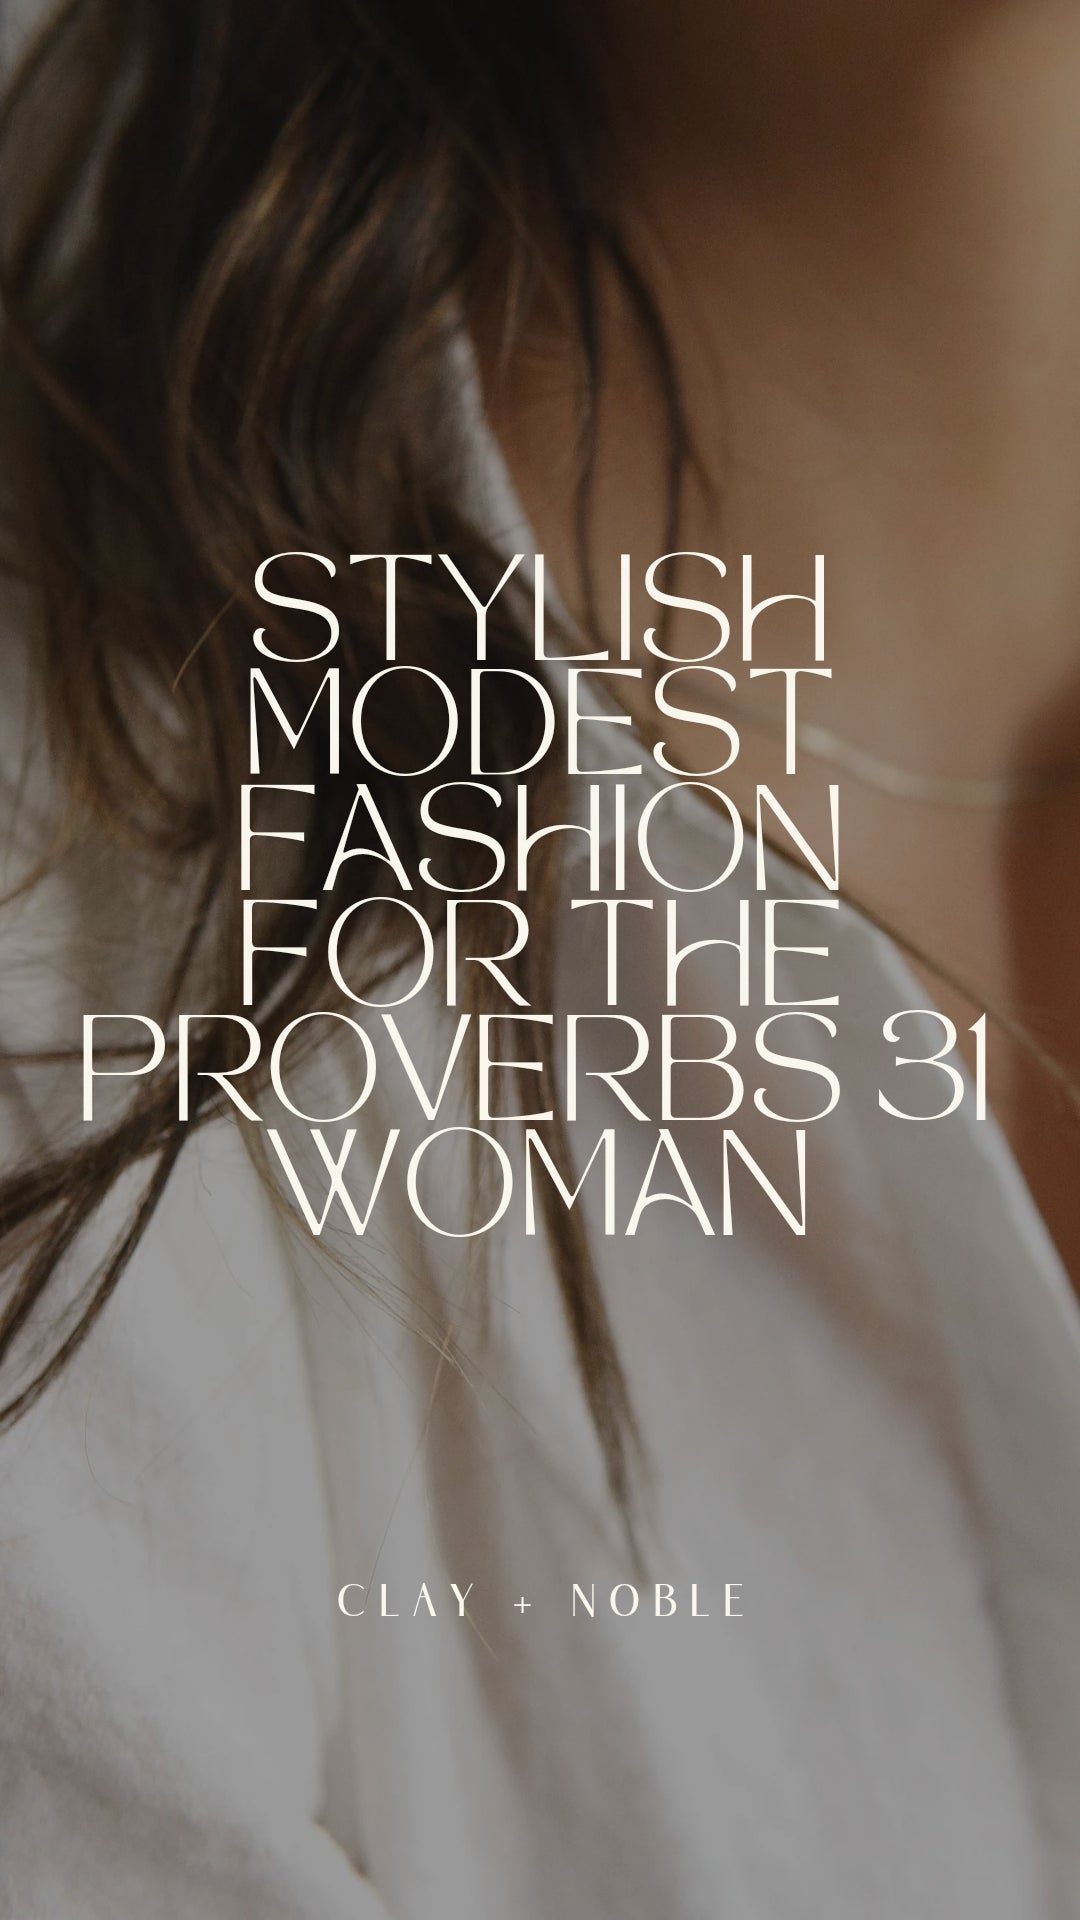 Stylish Modest Fashion for The Proverbs 31 Woman